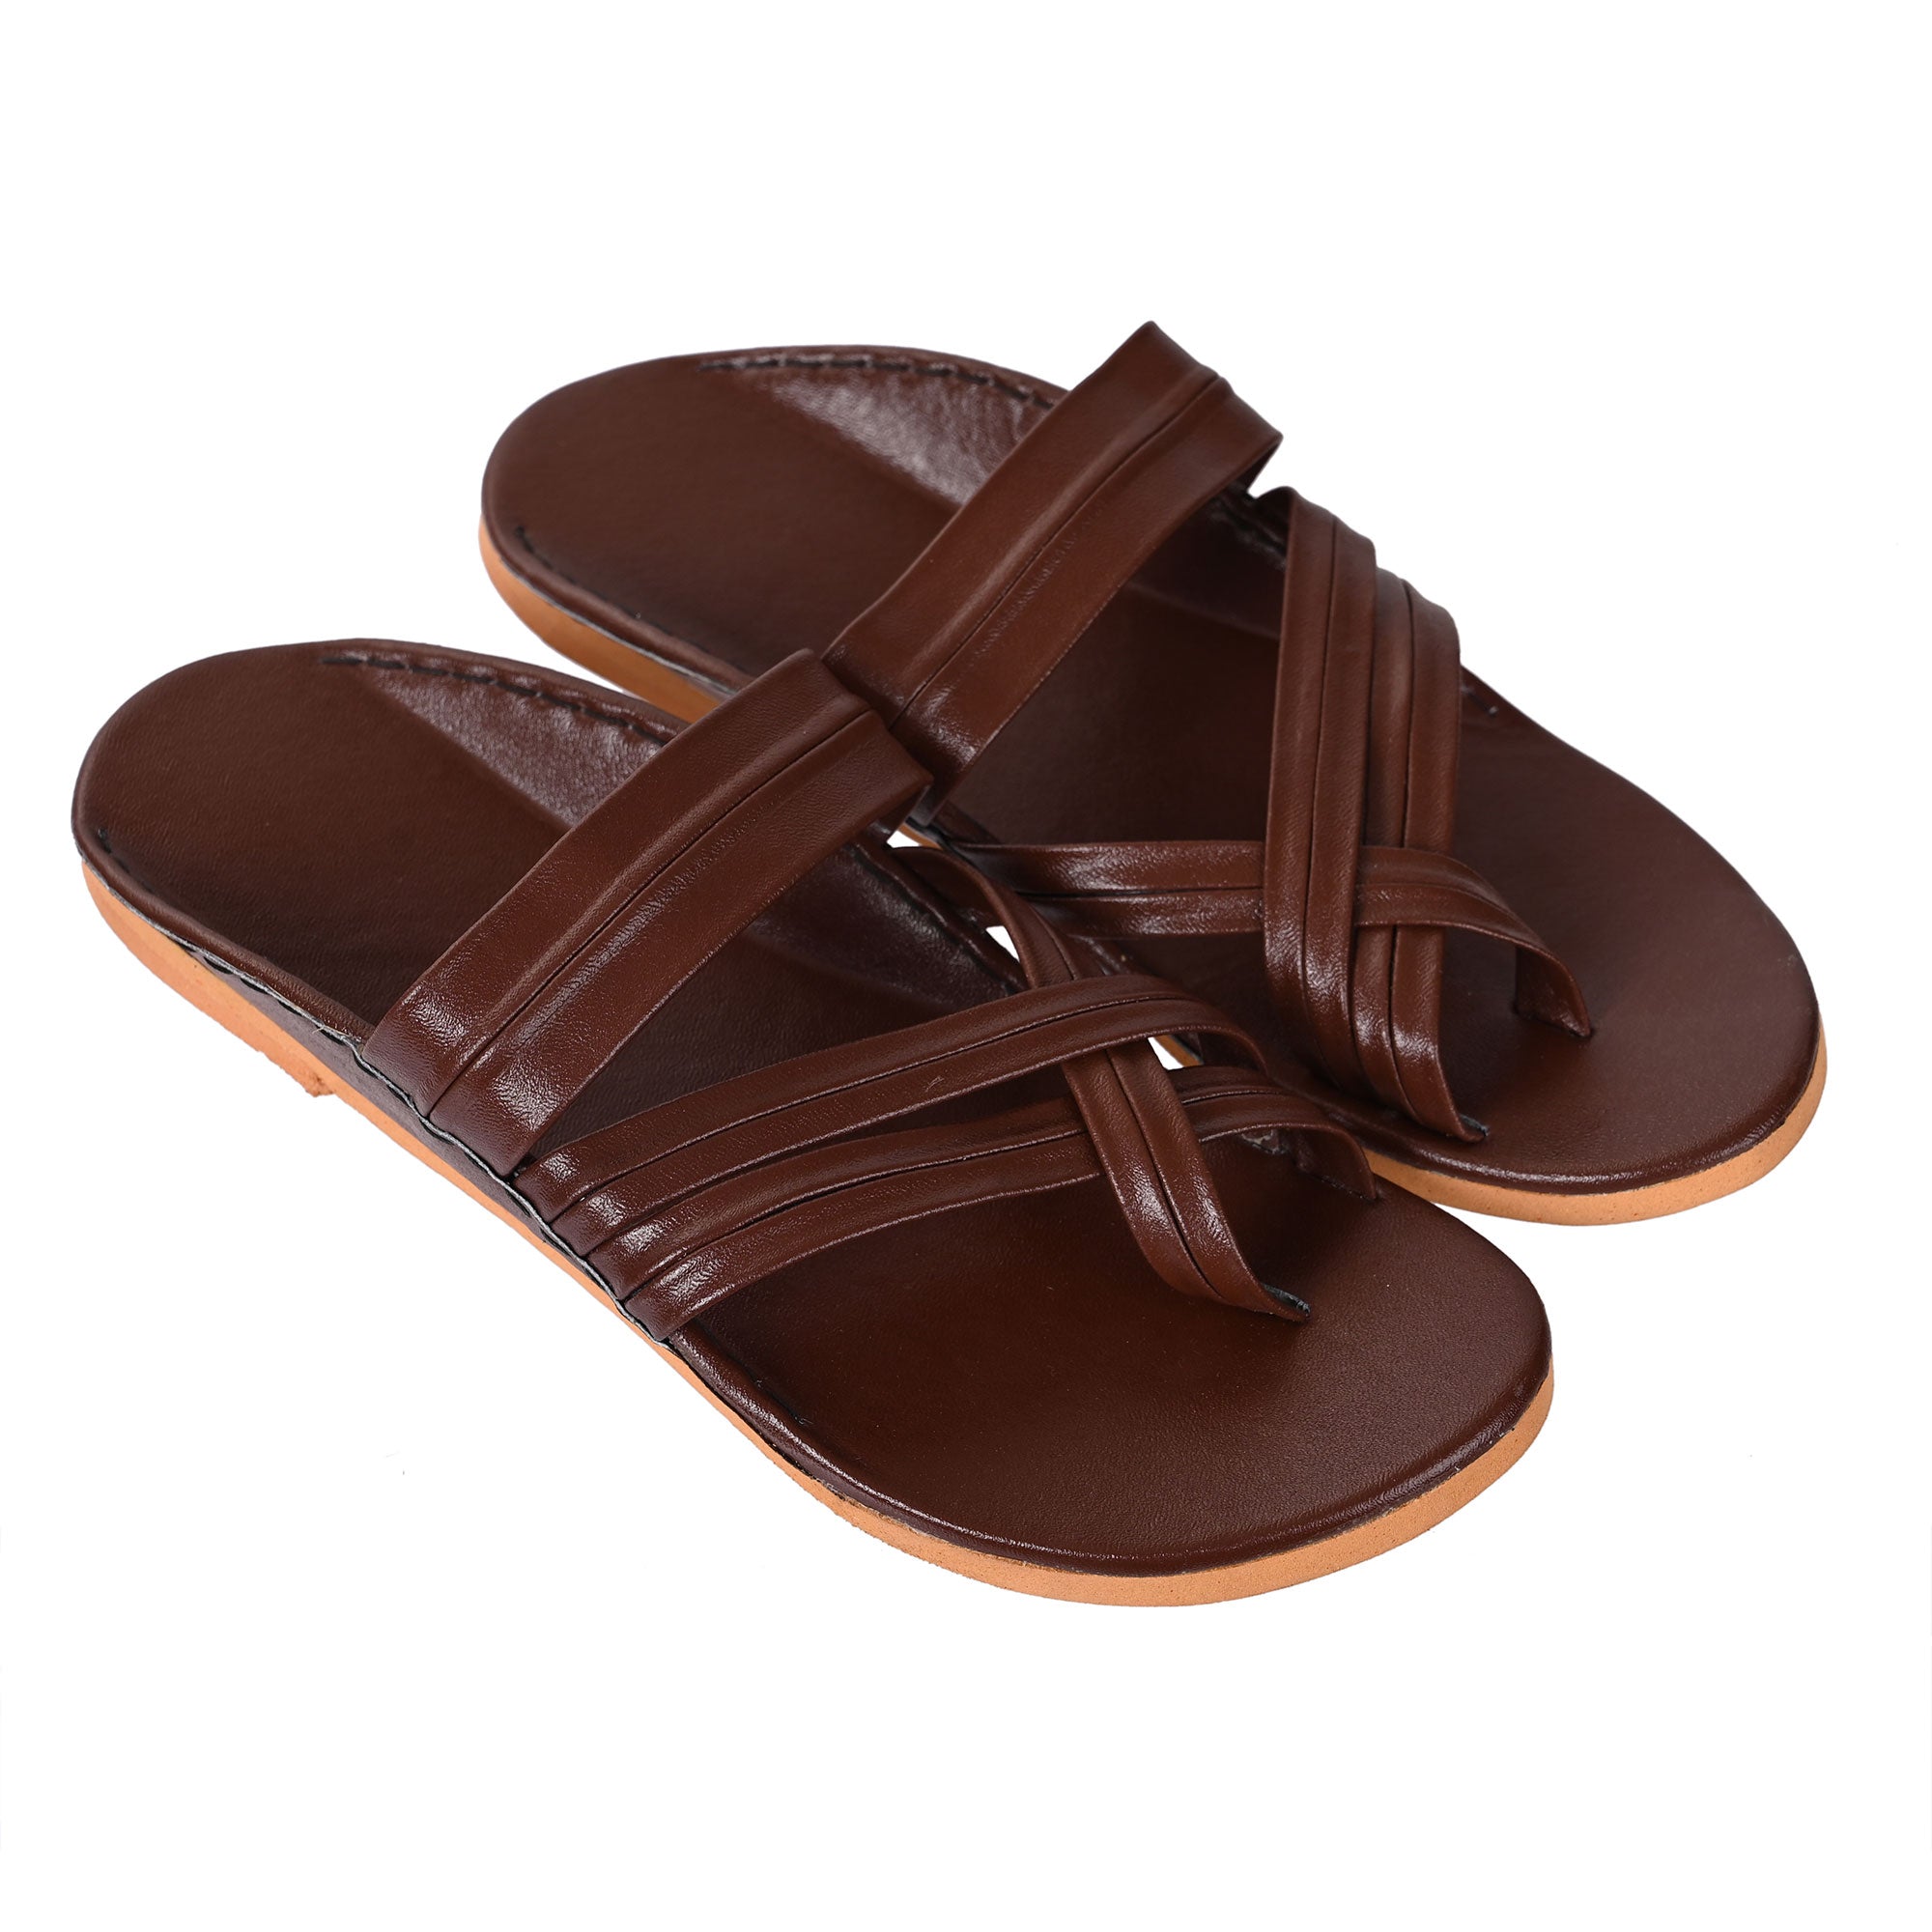 Brown Leather Chappal/Slippers for Men Kolhapuri